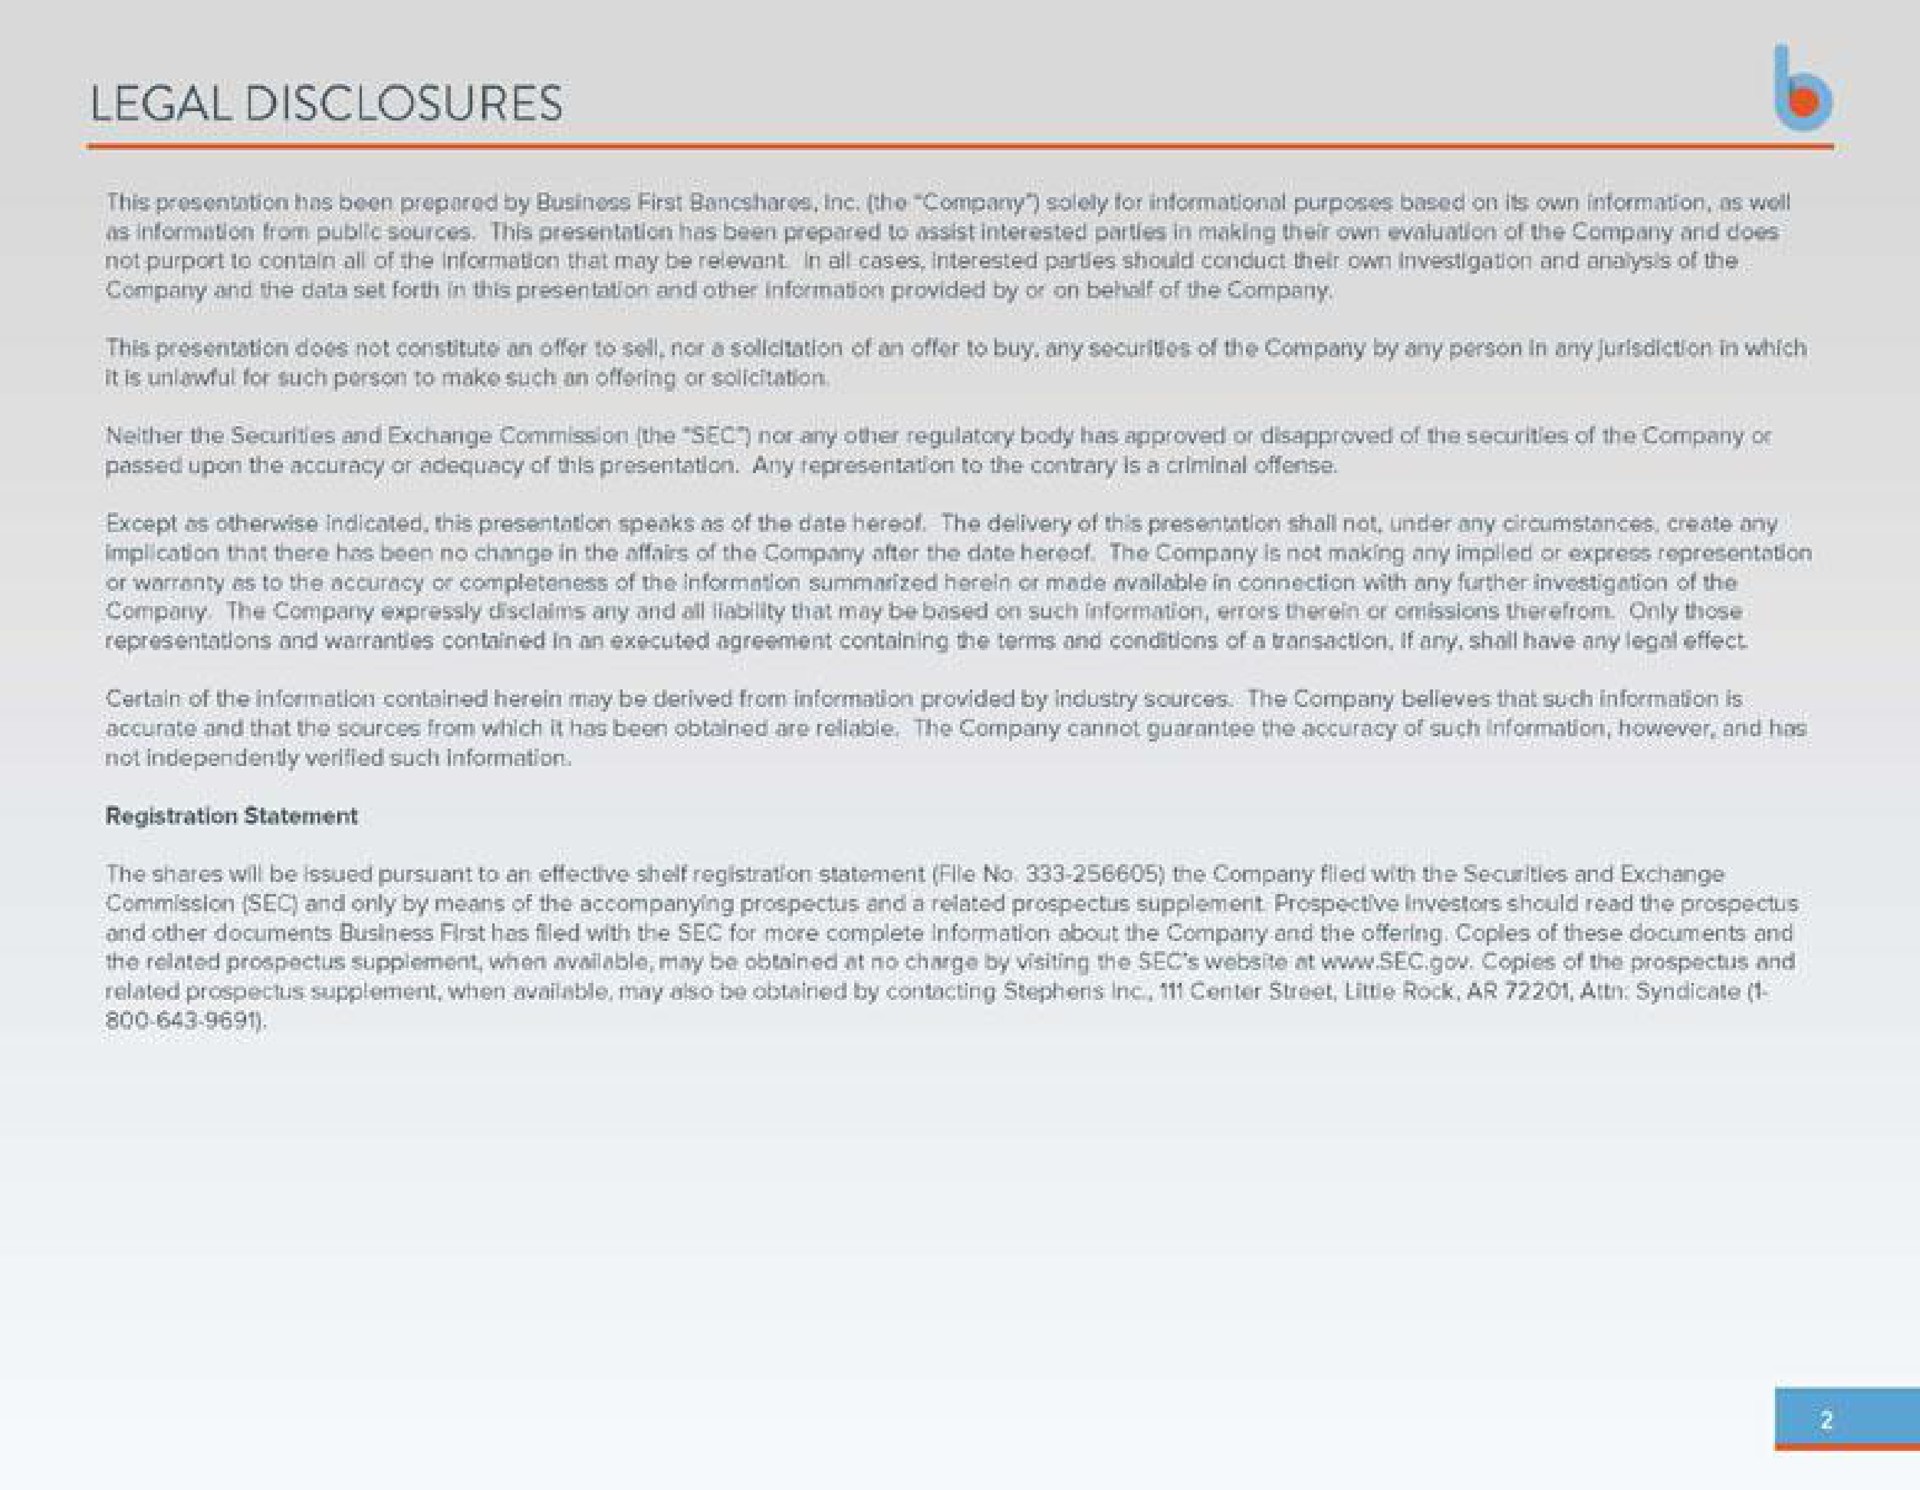 legal disclosures | Business First Bancshares